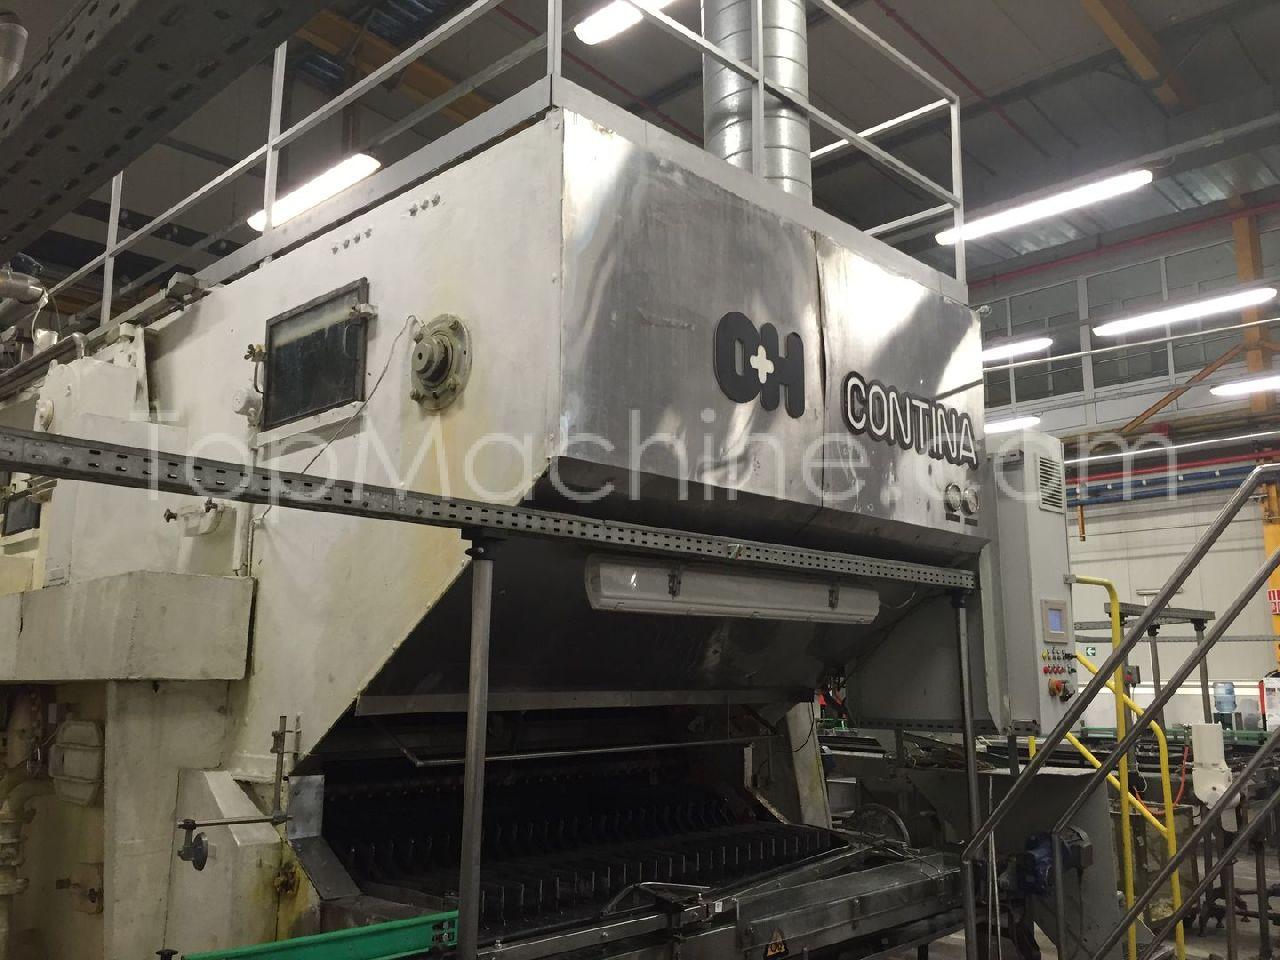 Used Ortmann & Herbst Contina Beverages & Liquids Washing rinsing